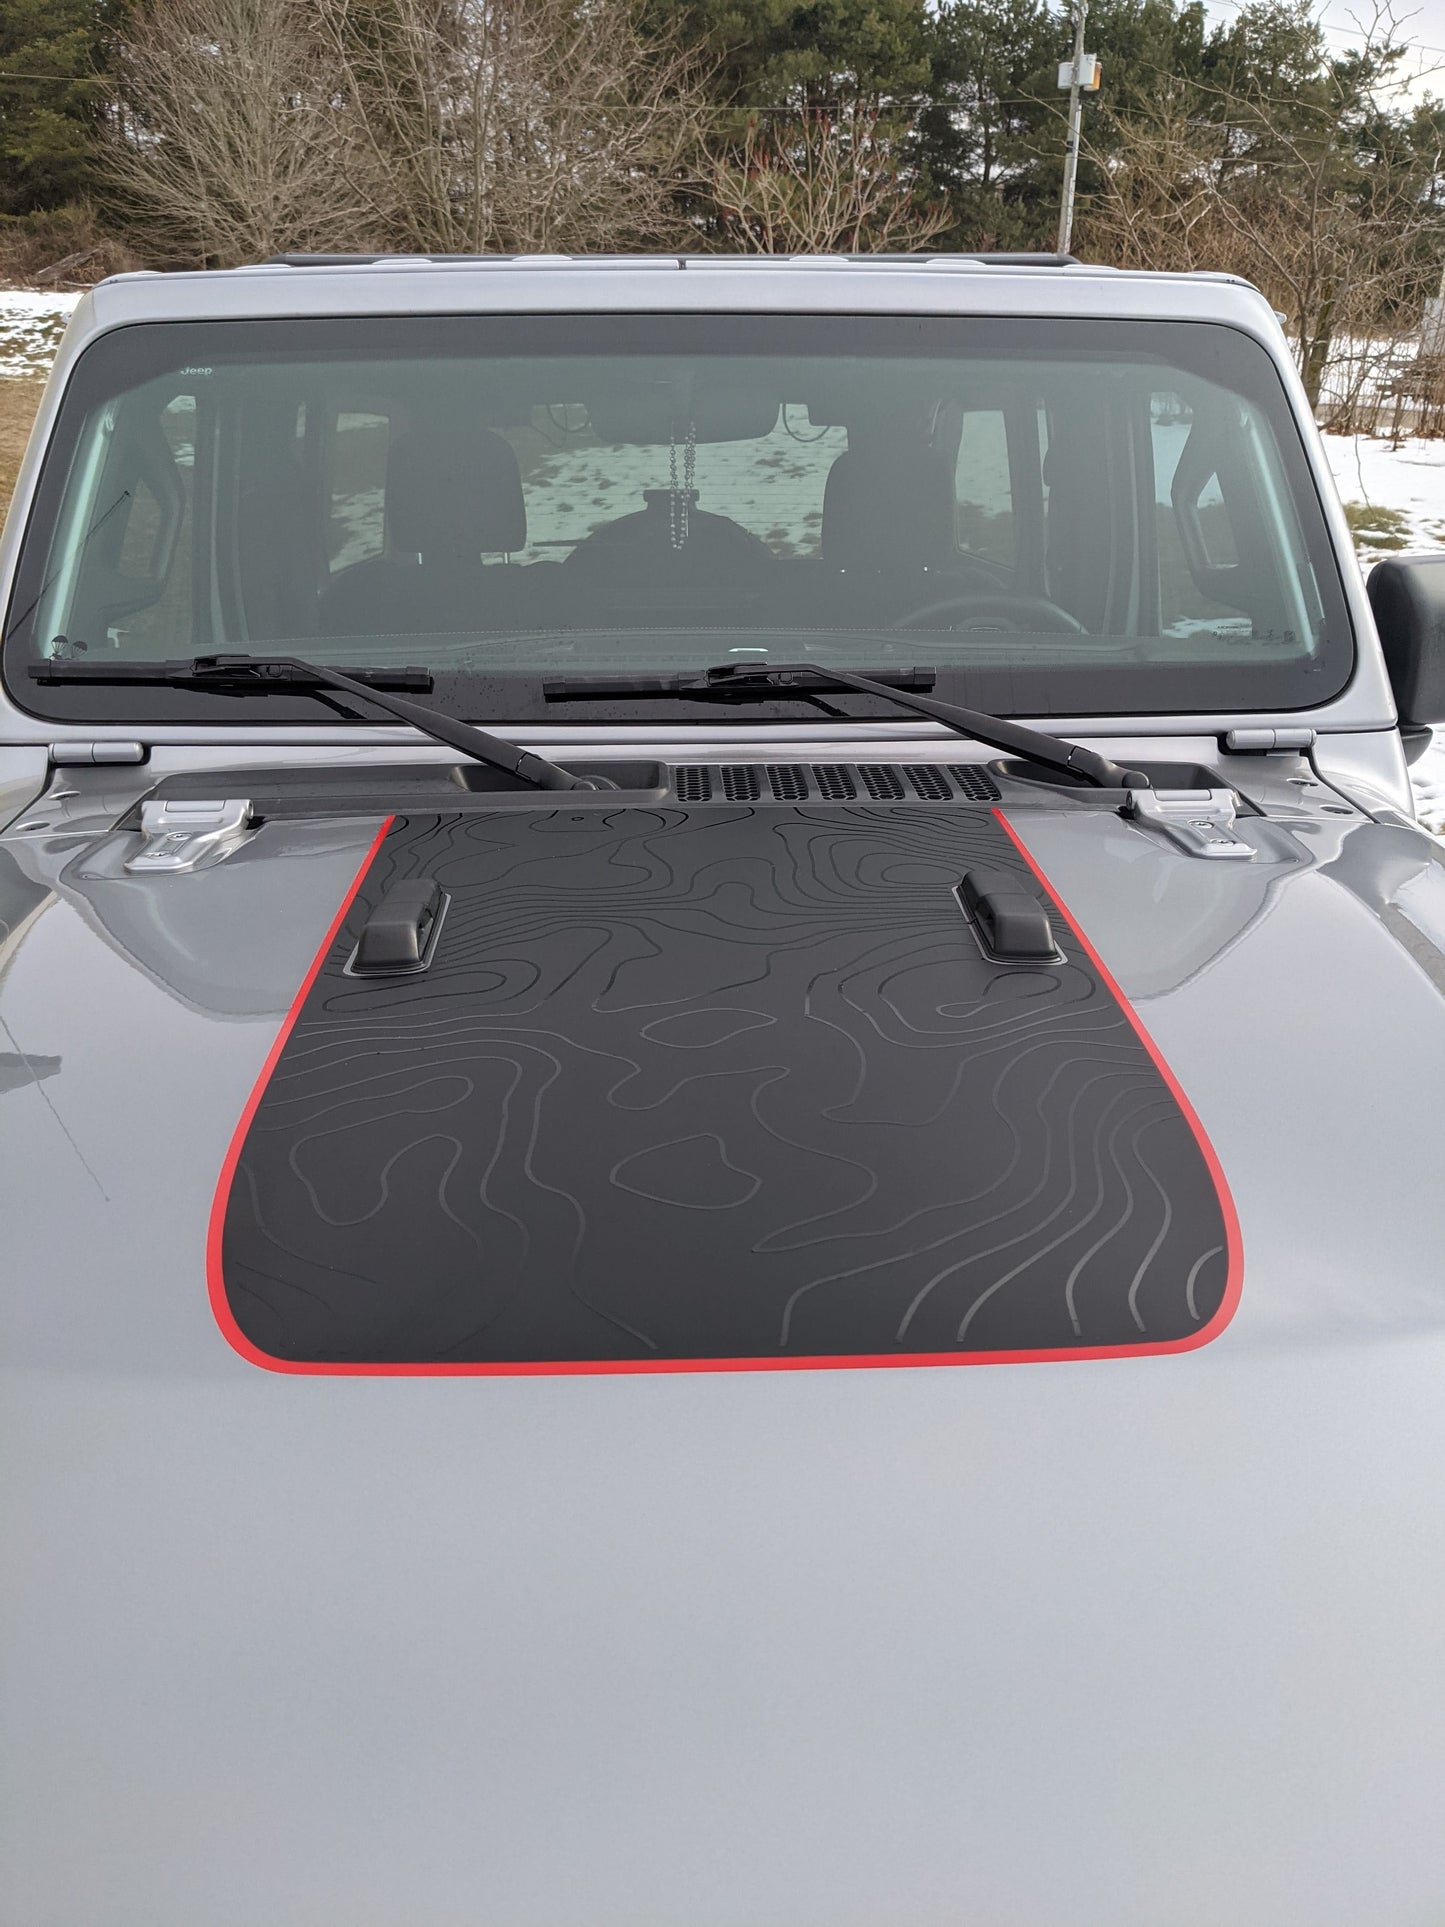 1941 Topographical Red Line Rubicon Blackout Hood Decal- Fits Jeep Wrangler & Gladiator JL Hood Decal (3 Pieces)